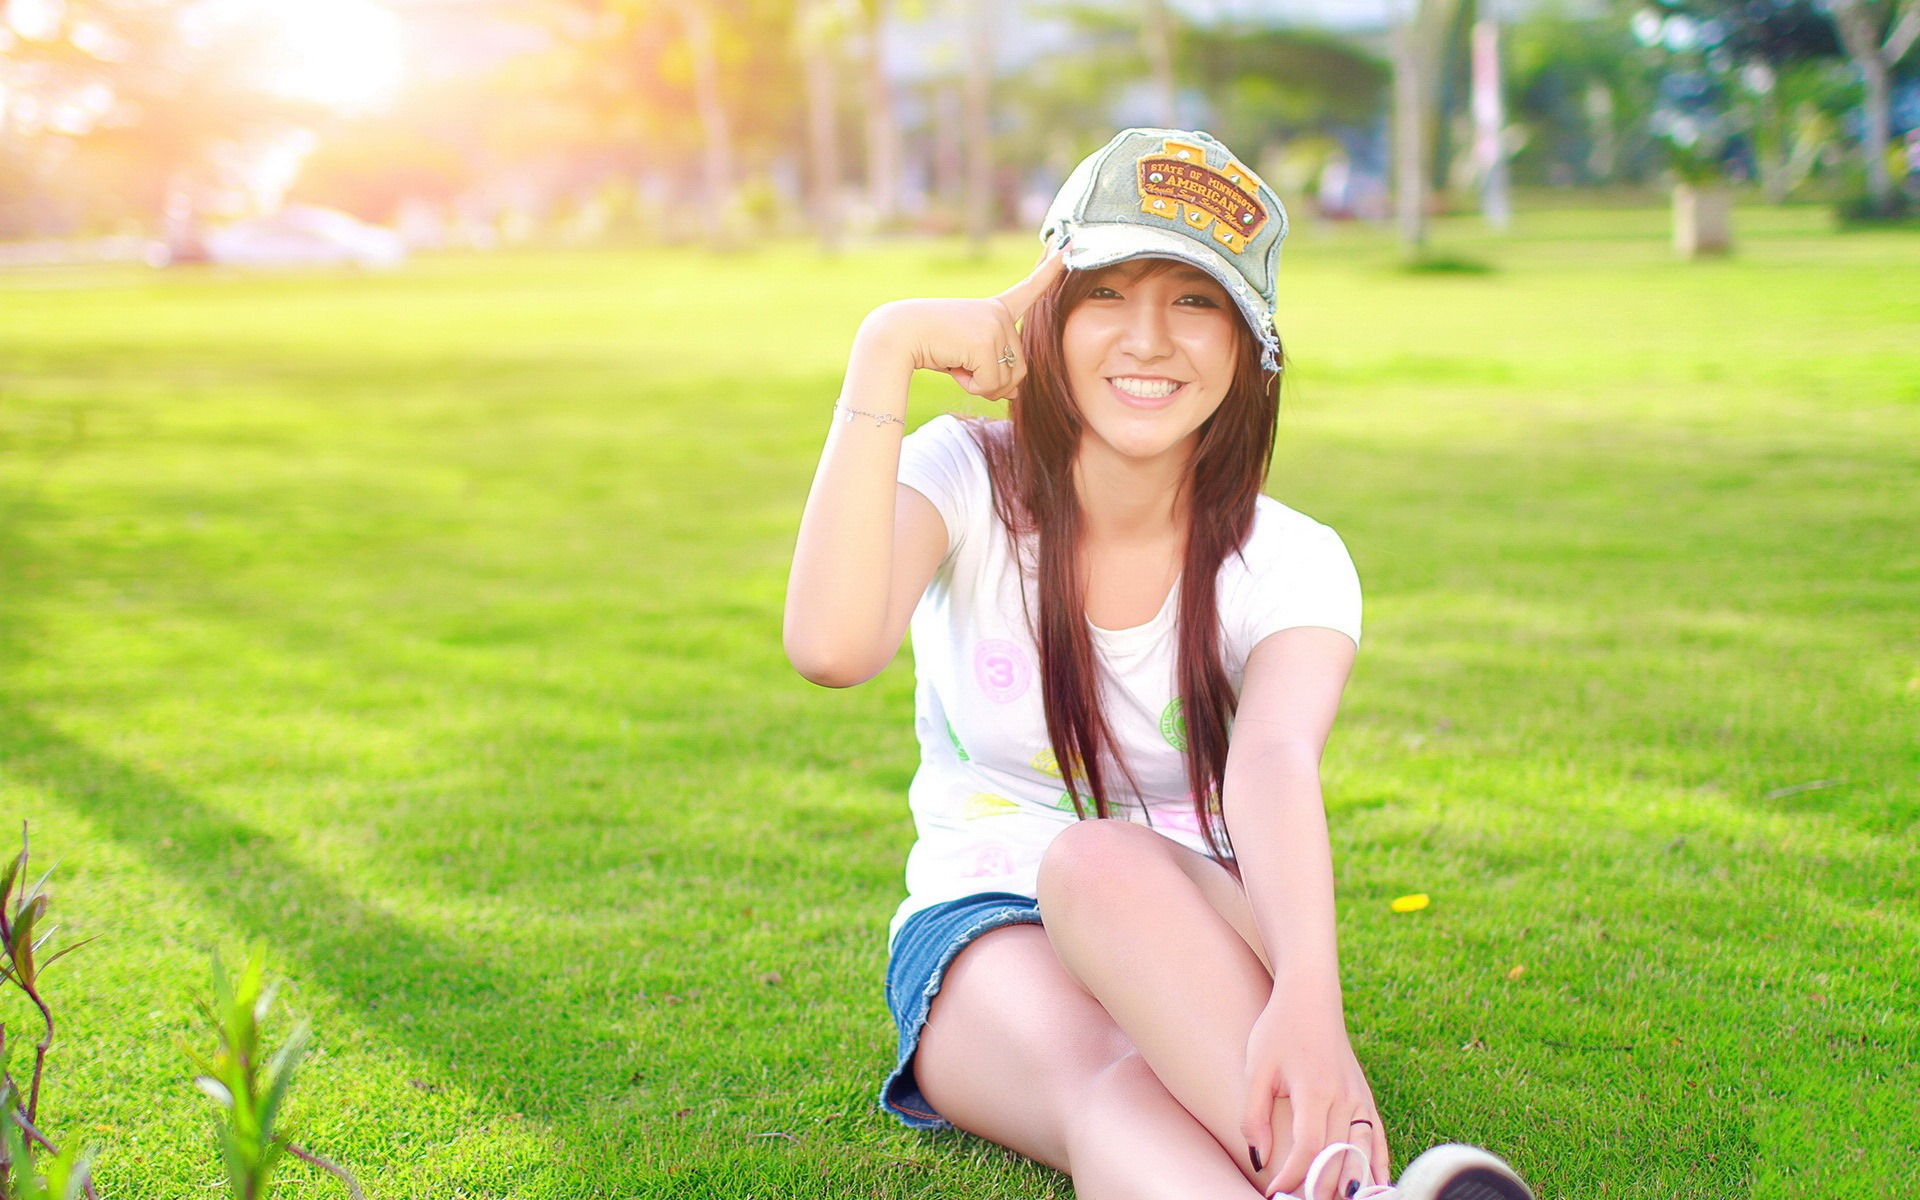 Pure and lovely young Asian girl HD wallpapers collection (5) #36 - 1920x1200